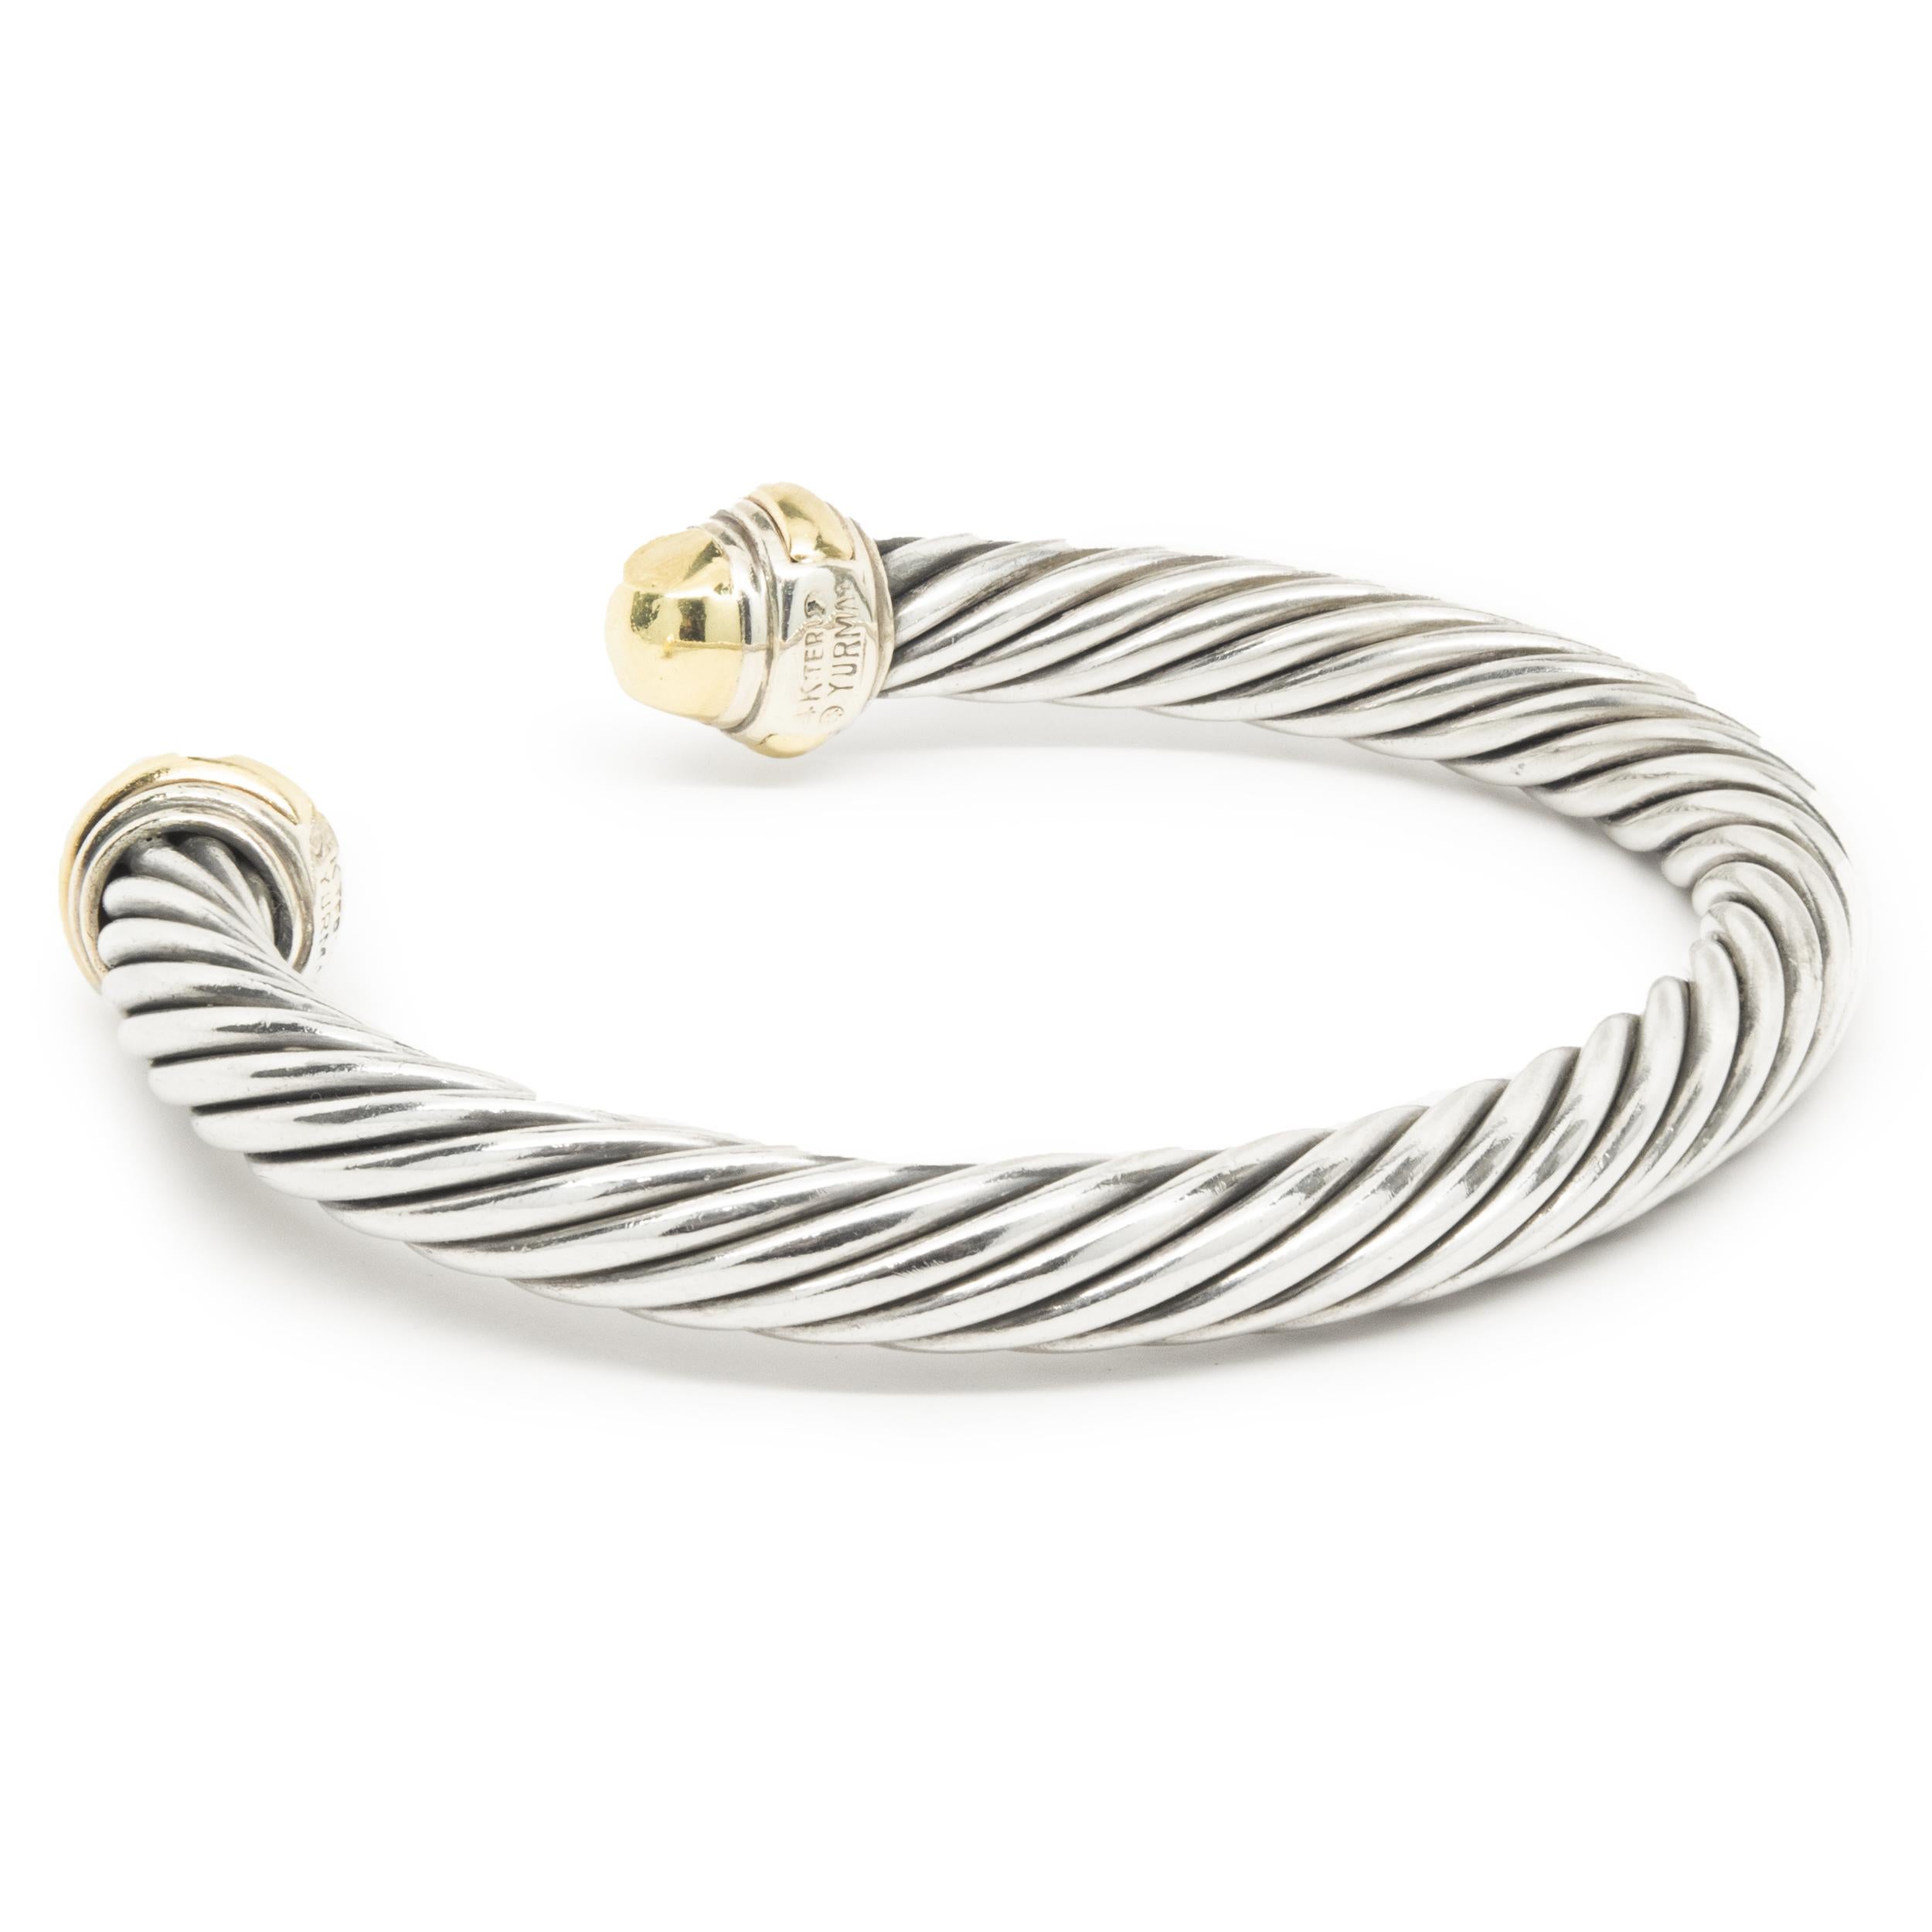 Designer: David Yurman
Material: sterling silver & 14K yellow gold
Dimensions: bracelet will fit up to a 7-inch wrist
Weight: 43.95 grams
